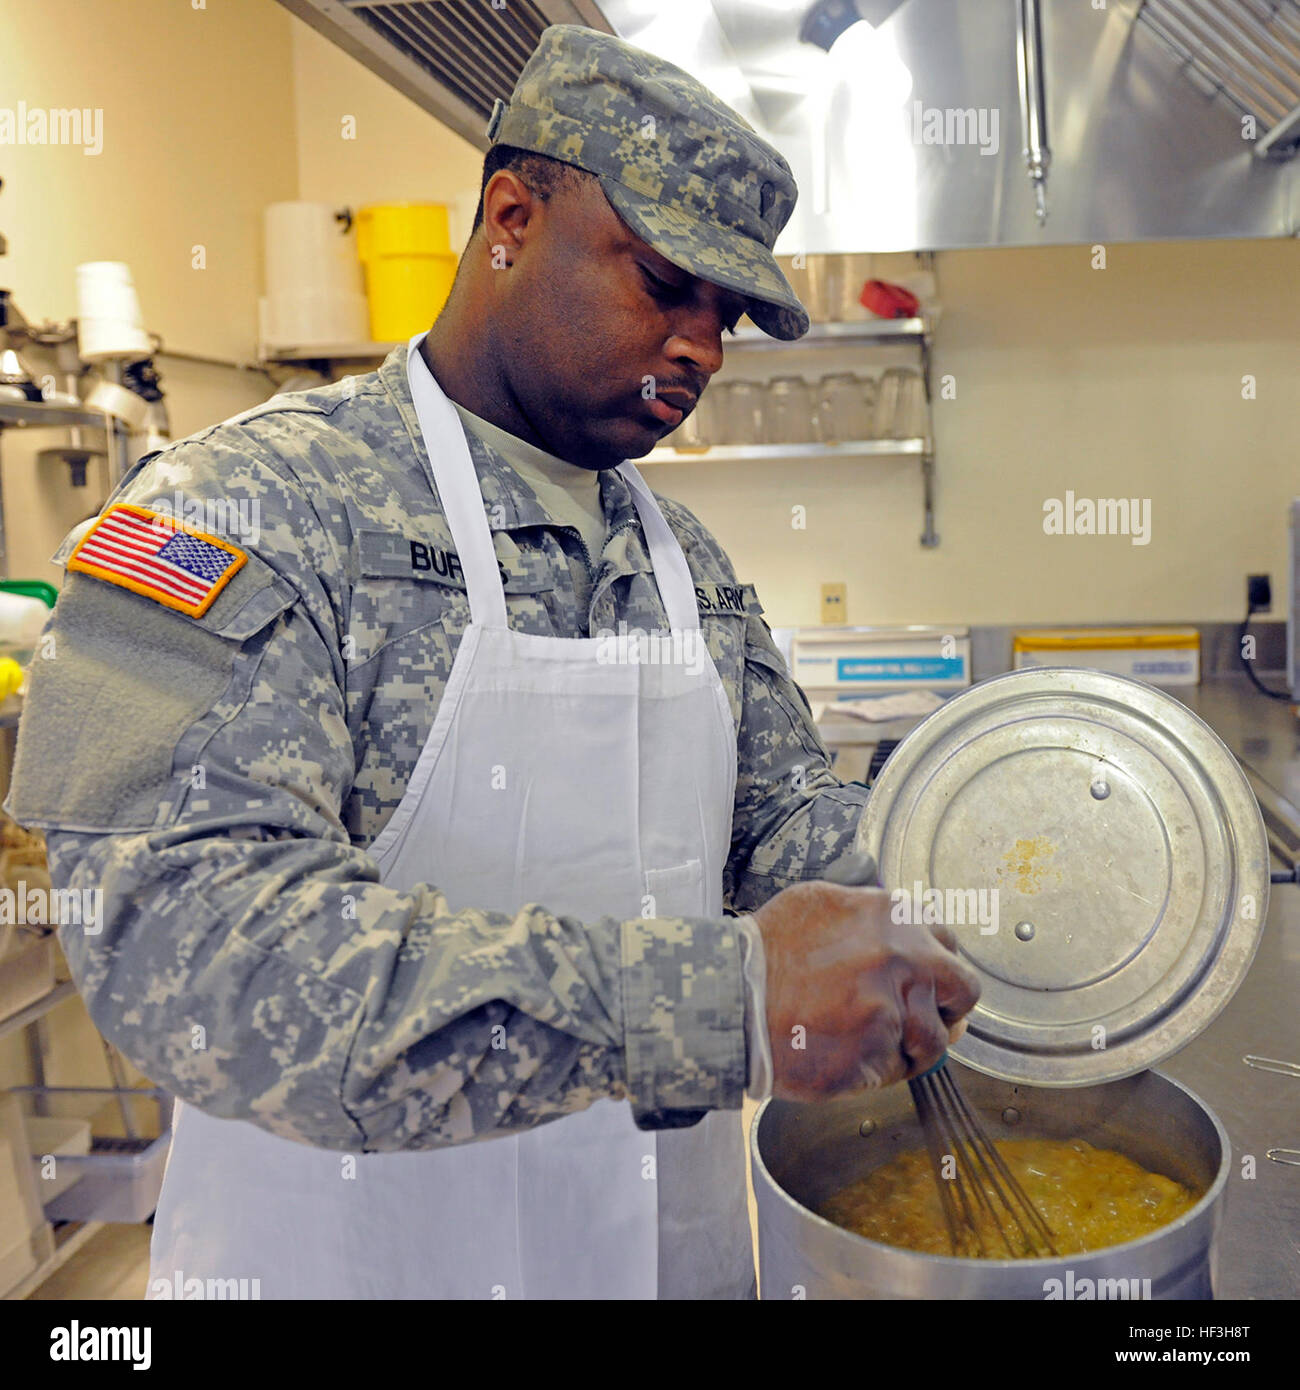 Spc. Jermaine Burns, of Indianola, Miss., assigned to the 1387th Quartermaster Company, Mississippi Army National Guard (MSARNG) stirs spicy brown rice pilaf during a food service workshop conducted by the Culinary Arts Institute at the Mississippi University for Women on July 23, 2015. The eighth-annual workshop provided MSARNG food service specialists with lecture and hands-on skill development designed not only to focus on the basics, but also to introduce advanced techniques relevant to Army food service programs. More than 75 Soldiers have been trained since the program’s inception in 200 Stock Photo